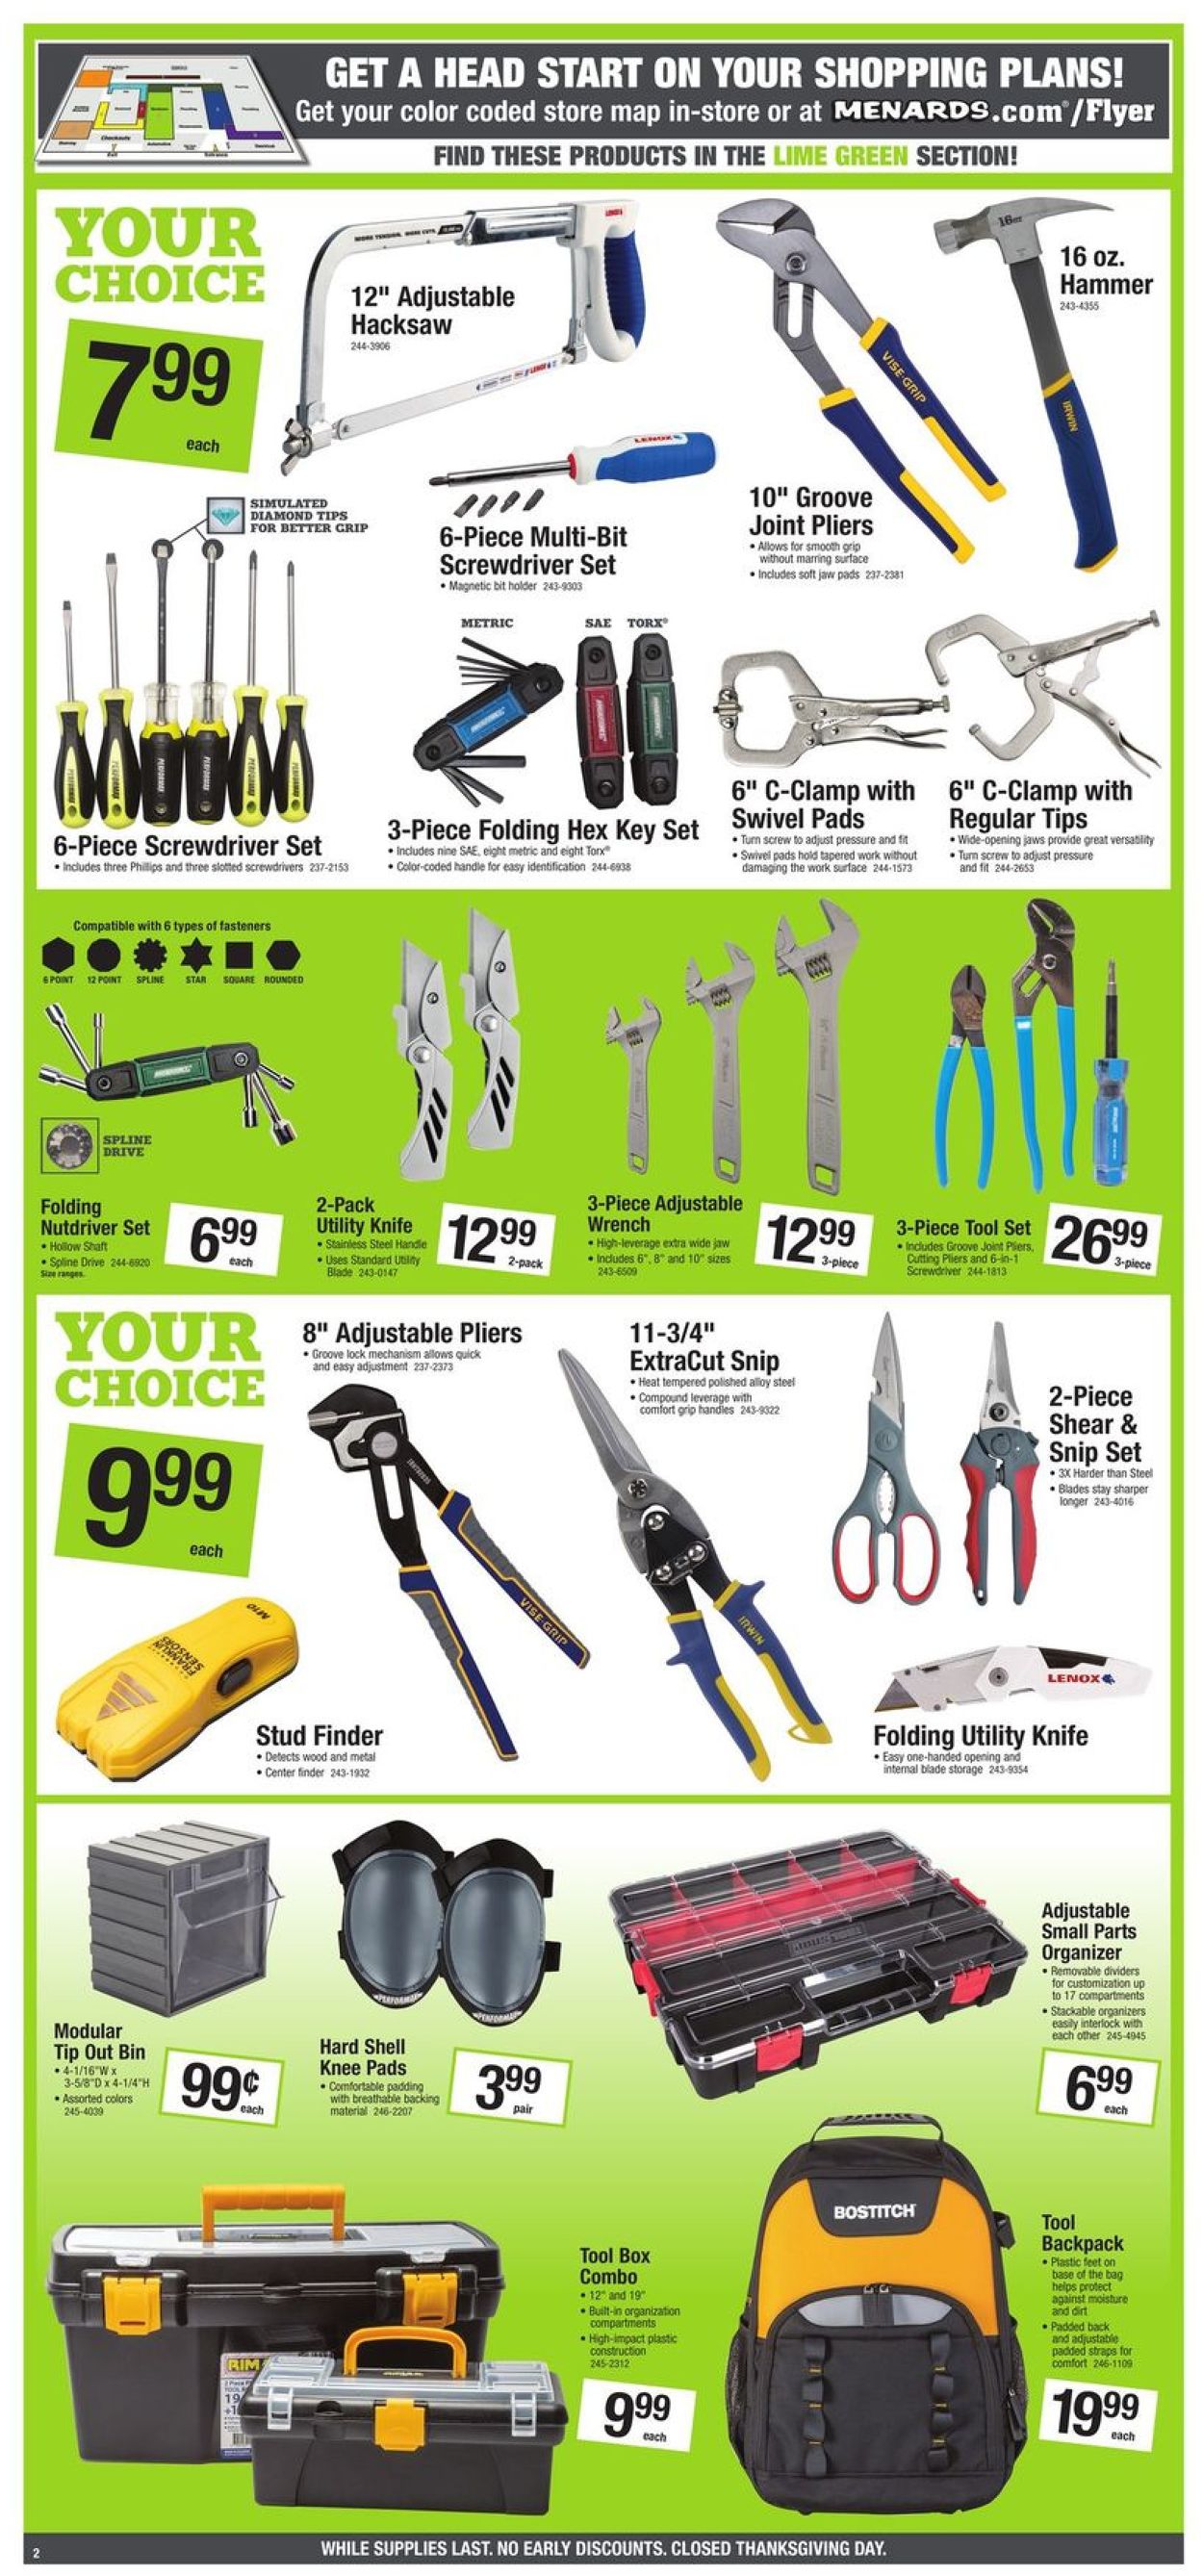 Menards Black Friday 2020 Current weekly ad 11/27 12/06/2020 [3